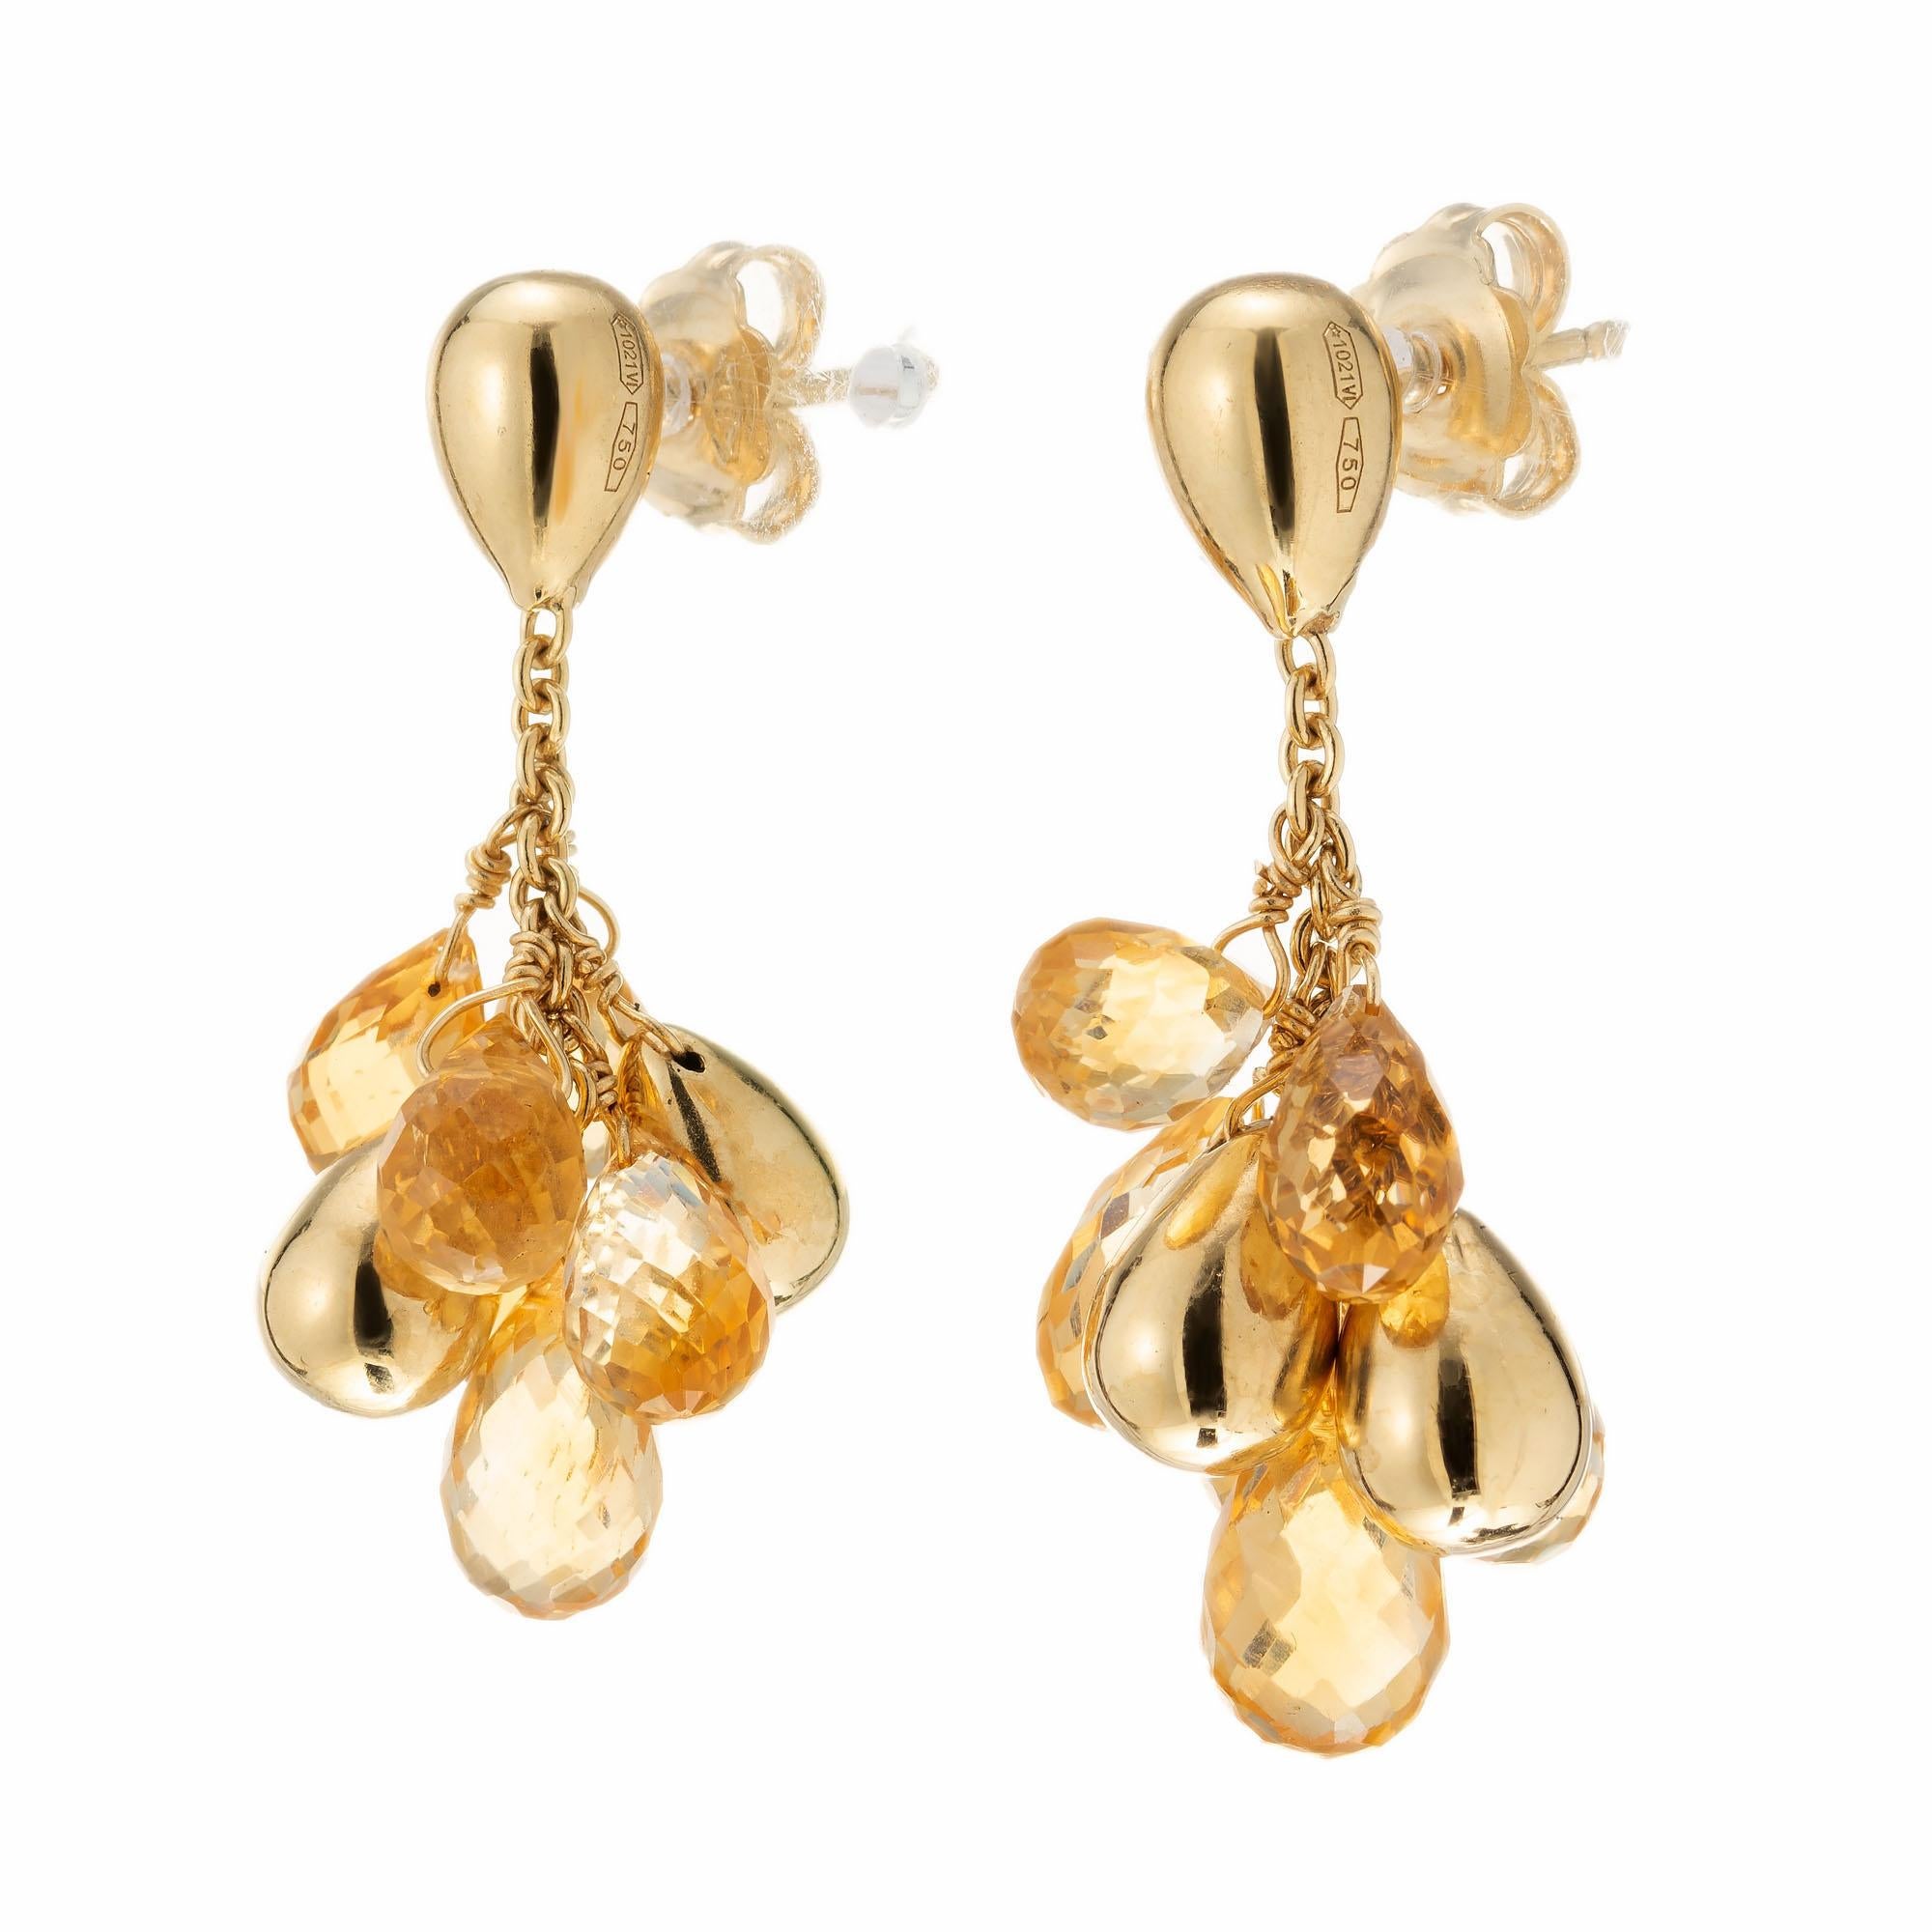 Marco Bicego 18k yellow gold citrine paradise drop earrings. Yellow pear shaped citrines mixed with pear shaped 18k yellow gold dangles. 

12 yellowish orange citrine briolette’s, approx. 10.00cts
18k yellow gold 
Stamped: 750
Hallmark: Marco Bicego